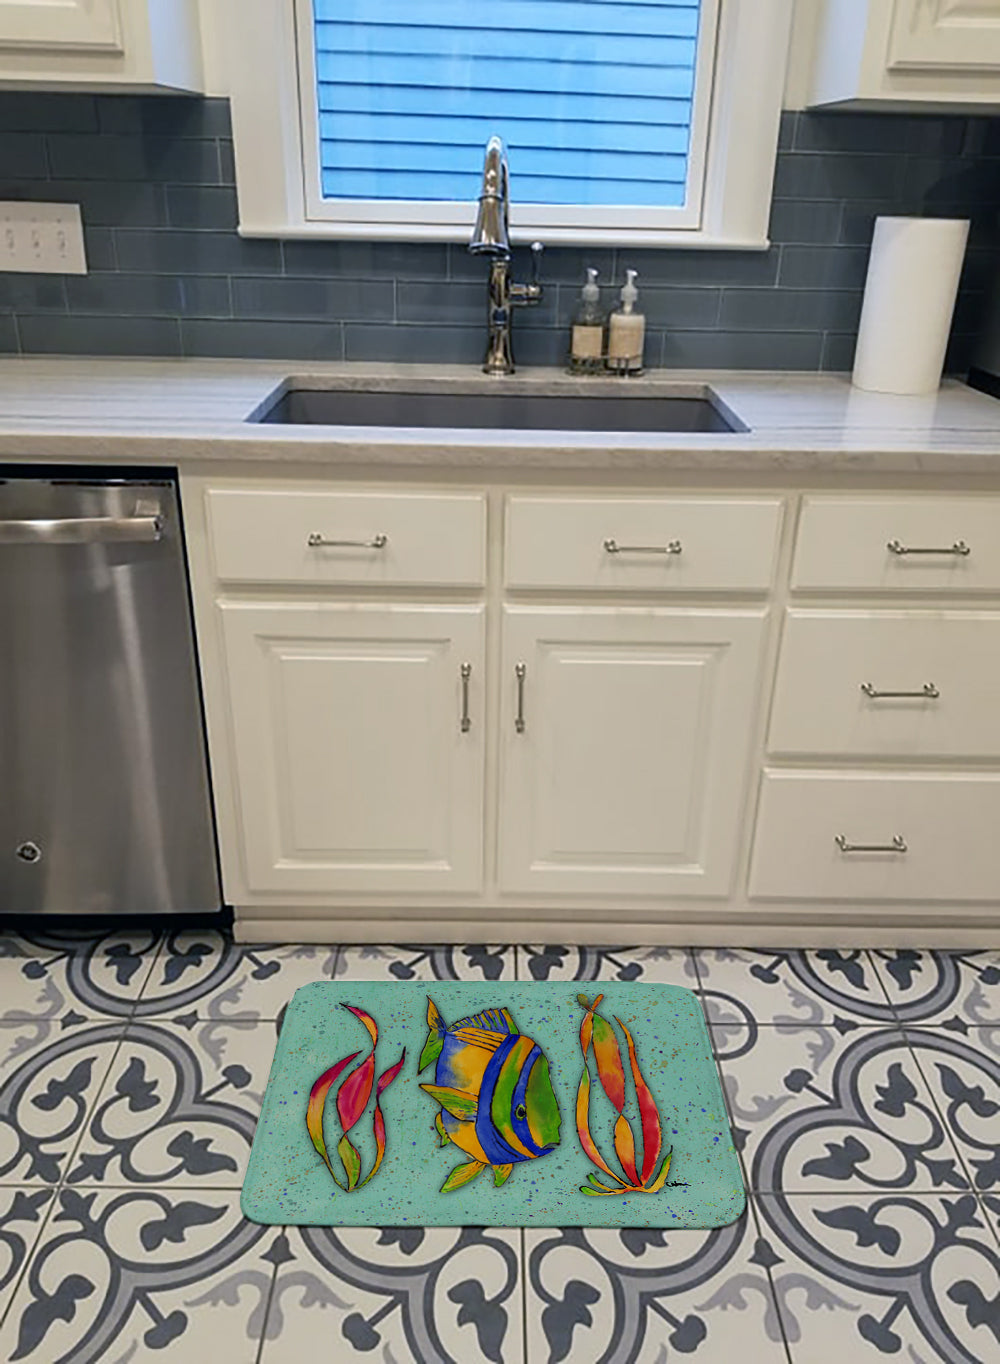 Tropical Fish on Teal Machine Washable Memory Foam Mat 8569RUG - the-store.com